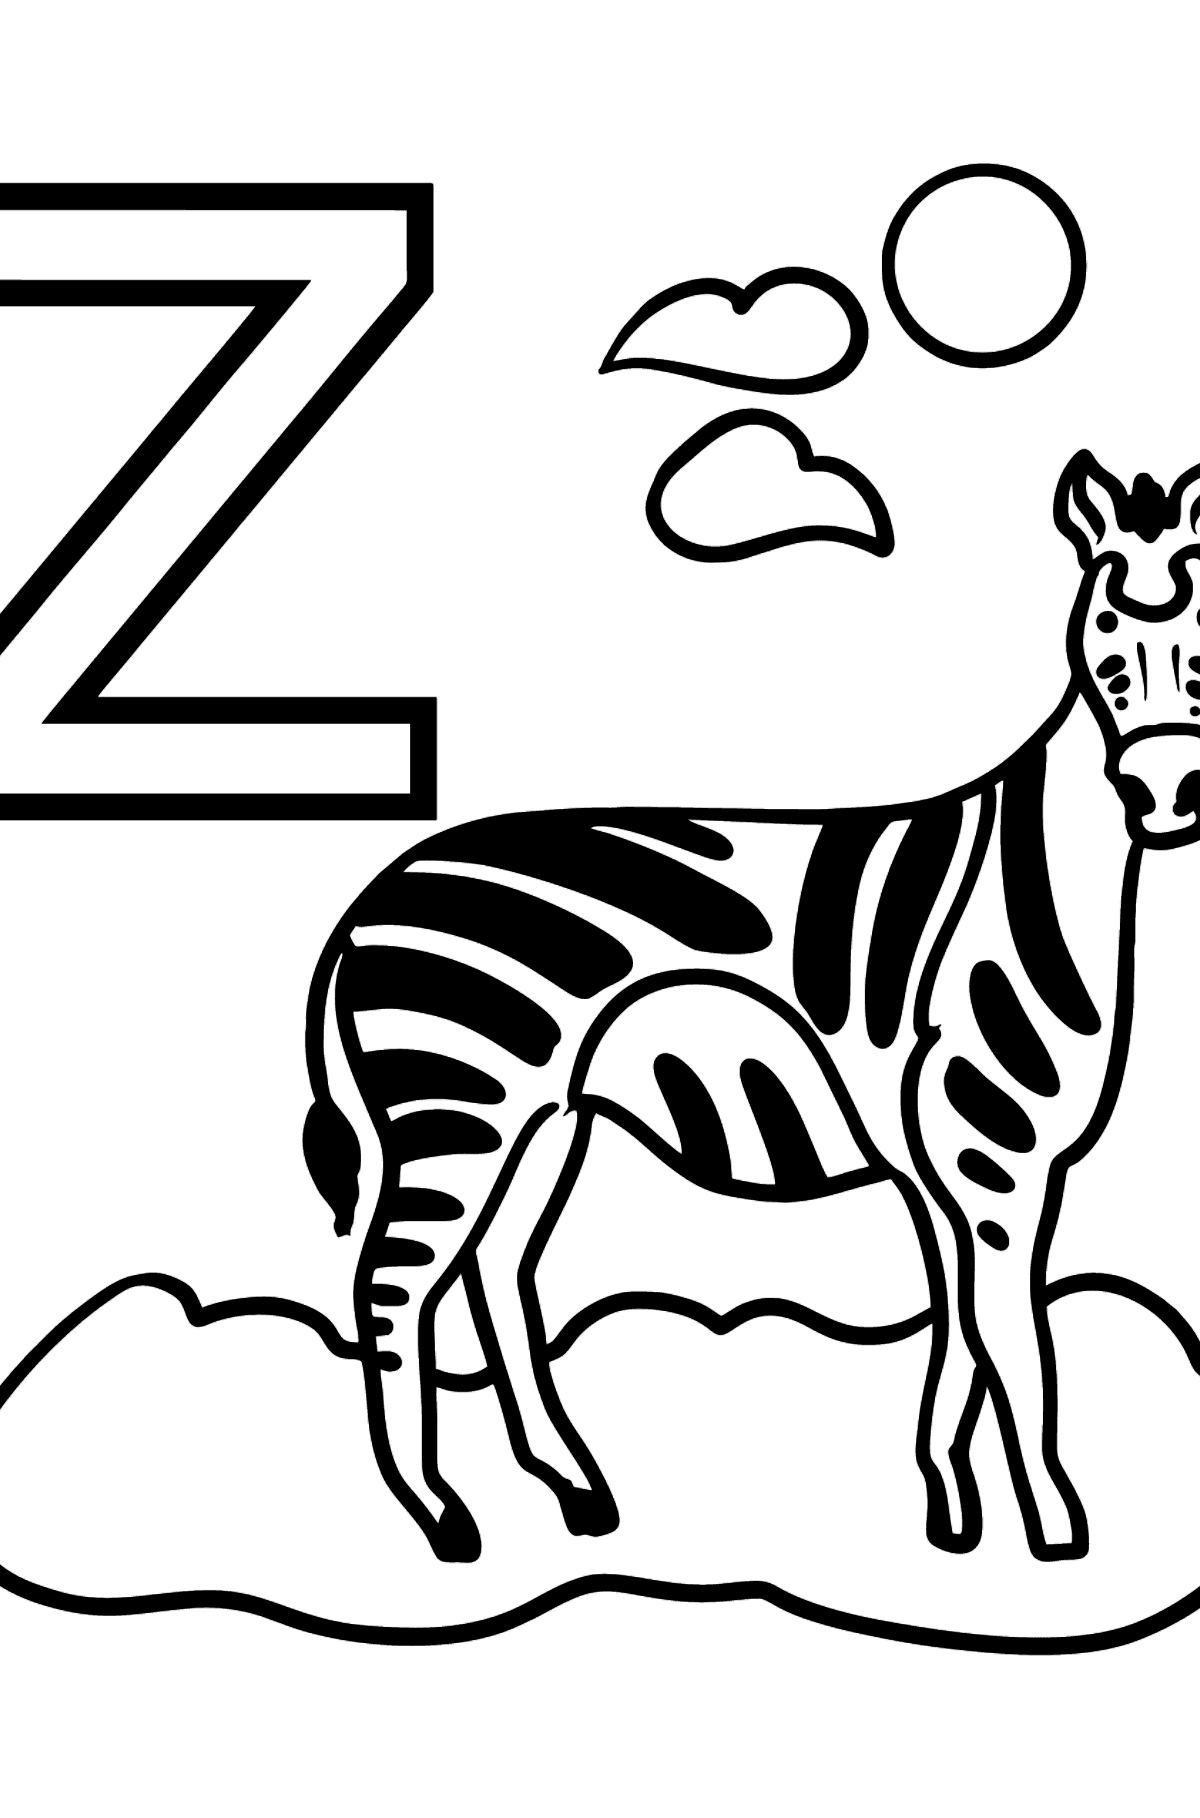 French Letter Z coloring pages - ZÈBRE - Coloring Pages for Kids